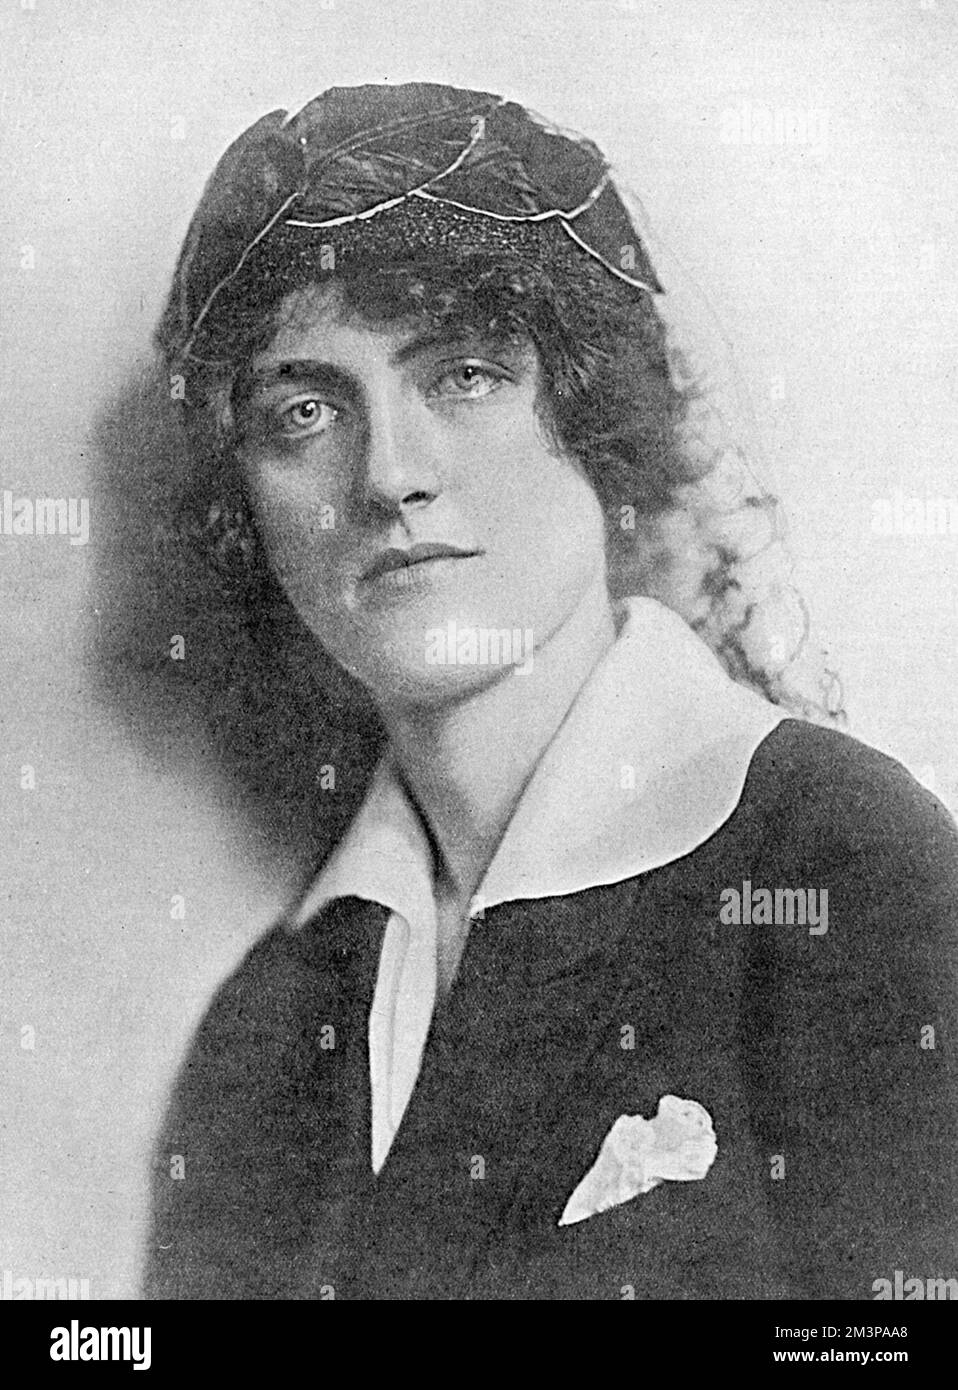 Lady Catherine (Kitty) Petre, formerly Catherine Margaret Boscawen, wife of Lionel Goerge Carroll, 16th Baron Petre. The 16th Baron, son of the 15th Baron and Julia Mary Cavendish-Taylor. He was born 3rd November 1890 and became a Captain in the Coldstream Guards. He was wounded near Arras in the late Spring of 1915, was repatriated and died of his wounds in September leaving two children, one born posthumously. Lady Petre subsequently remarried and became Lady Rasch. She was responsible for the restoration of the Petre family seat, Ingatestone Hall, in Essex.      Date: 1918 Stock Photo